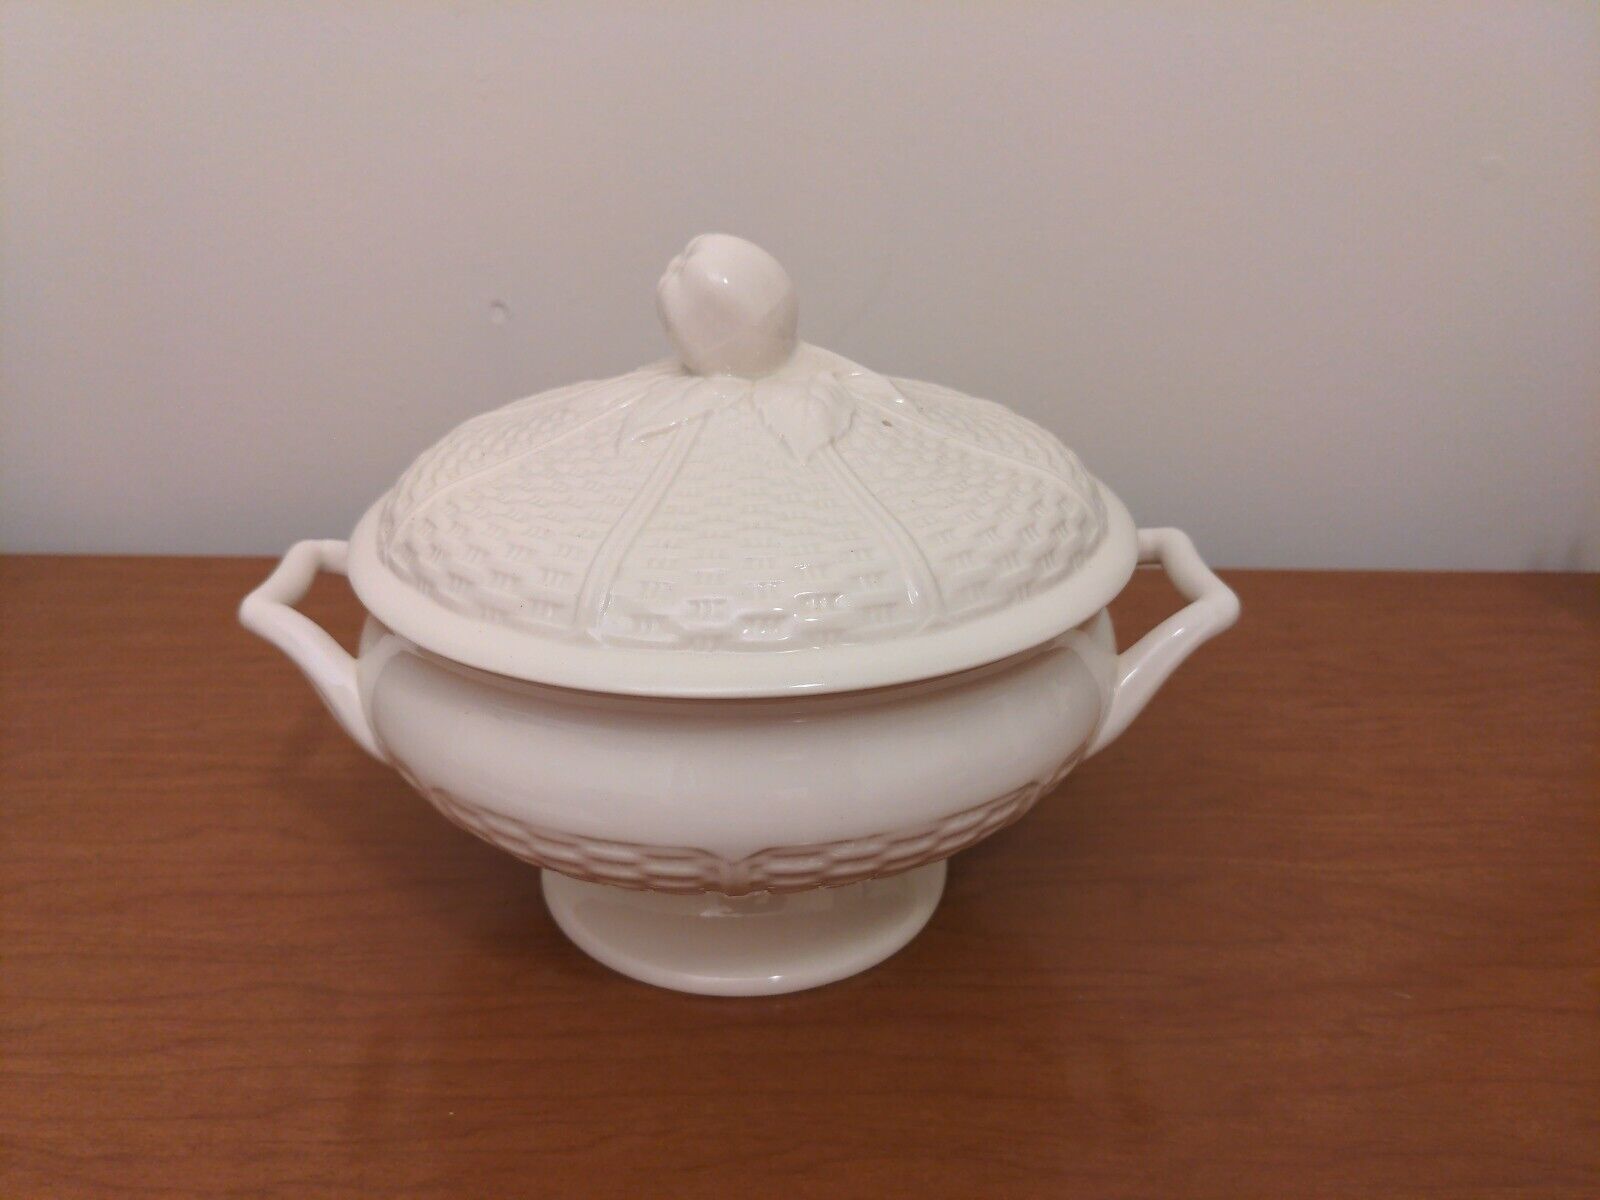 Wedgewood Willow Weaver Tureen with Cover- No Crazing/ No Chips/ No Use Marks